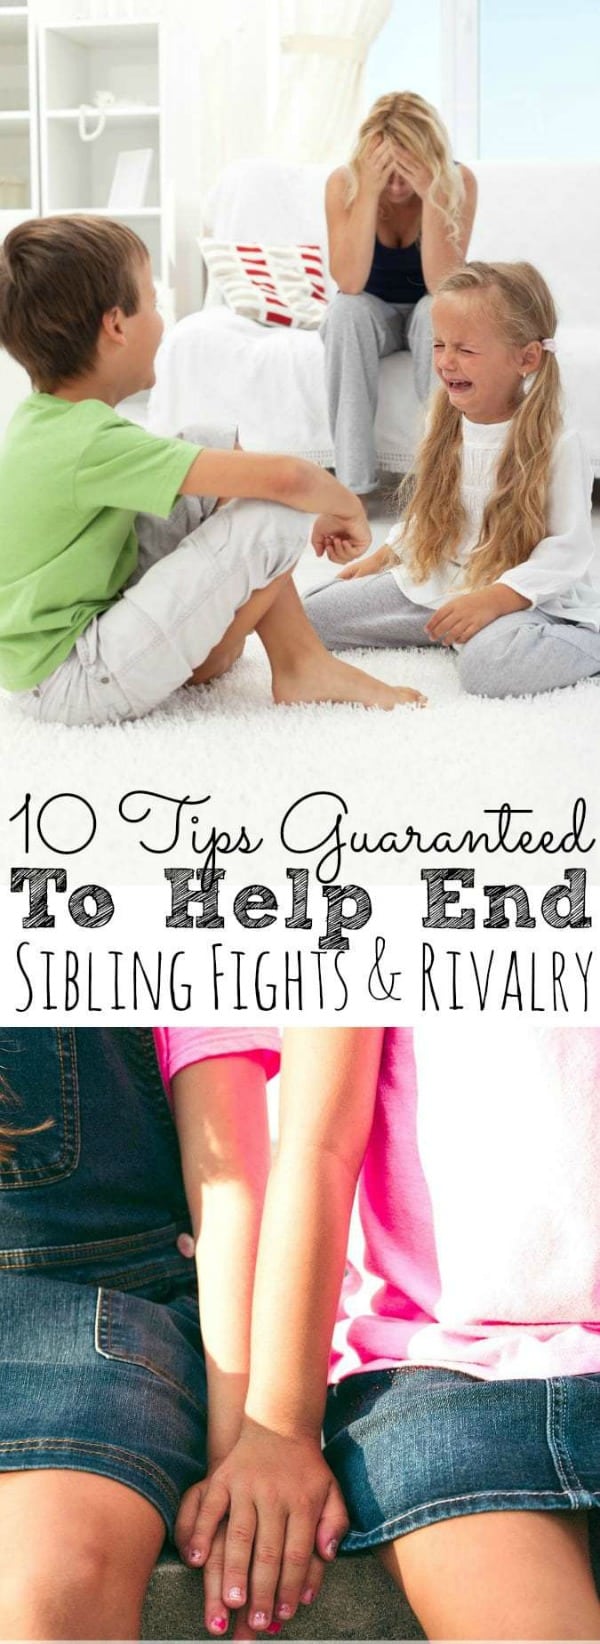 Tips To Help End Sibling Fighting